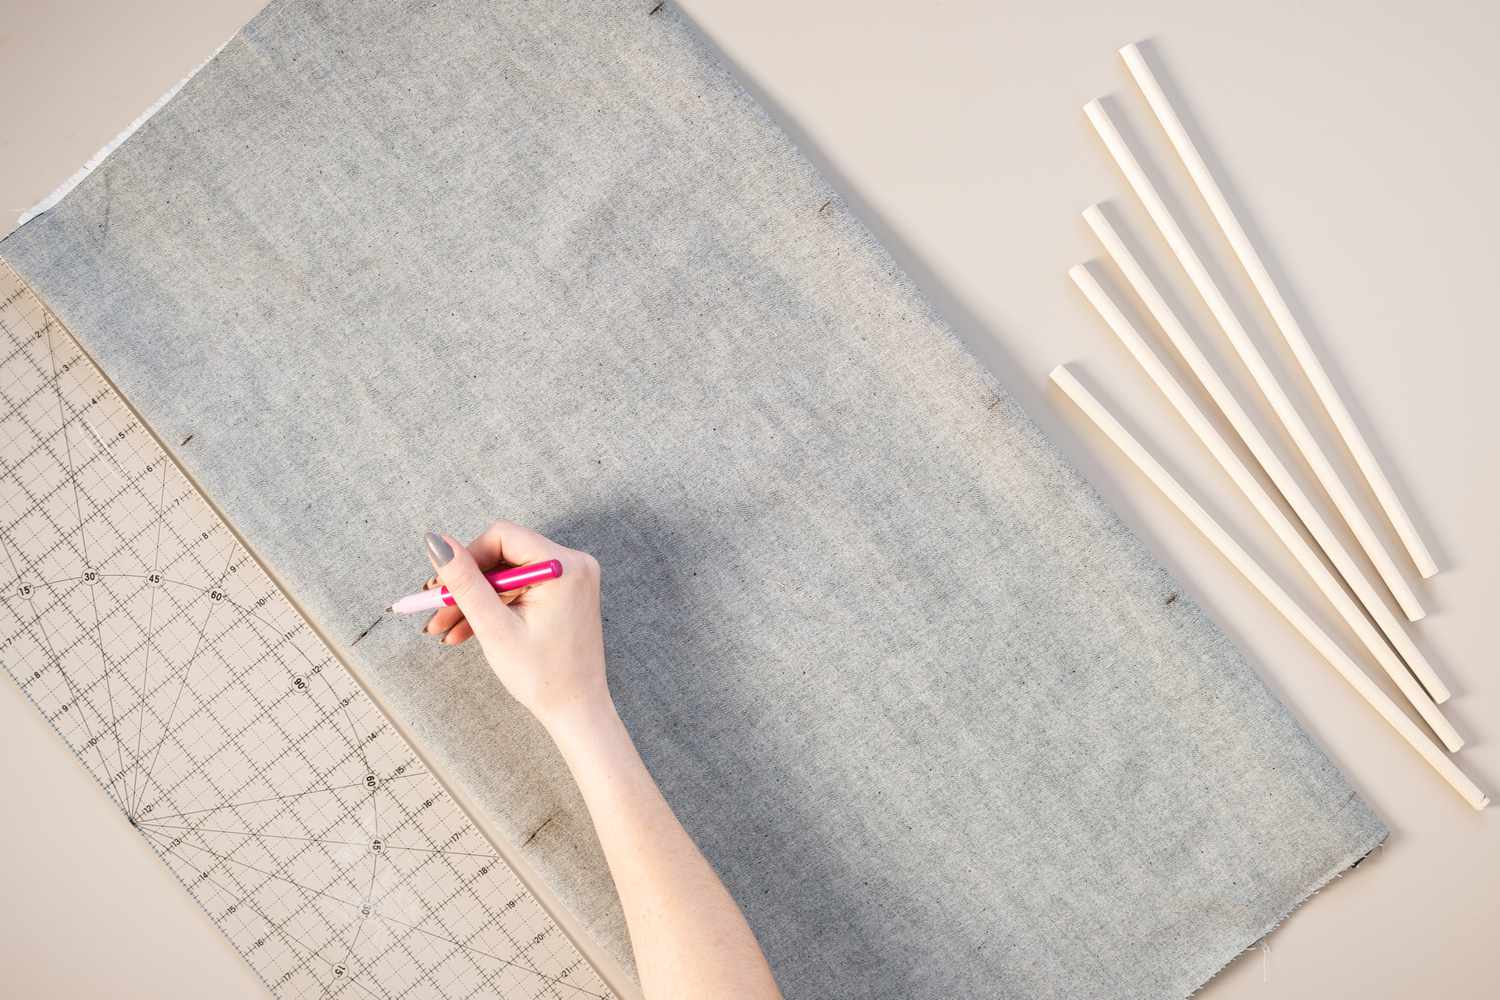 Dowel rod locations marked on wrong side of fabric next to ruler